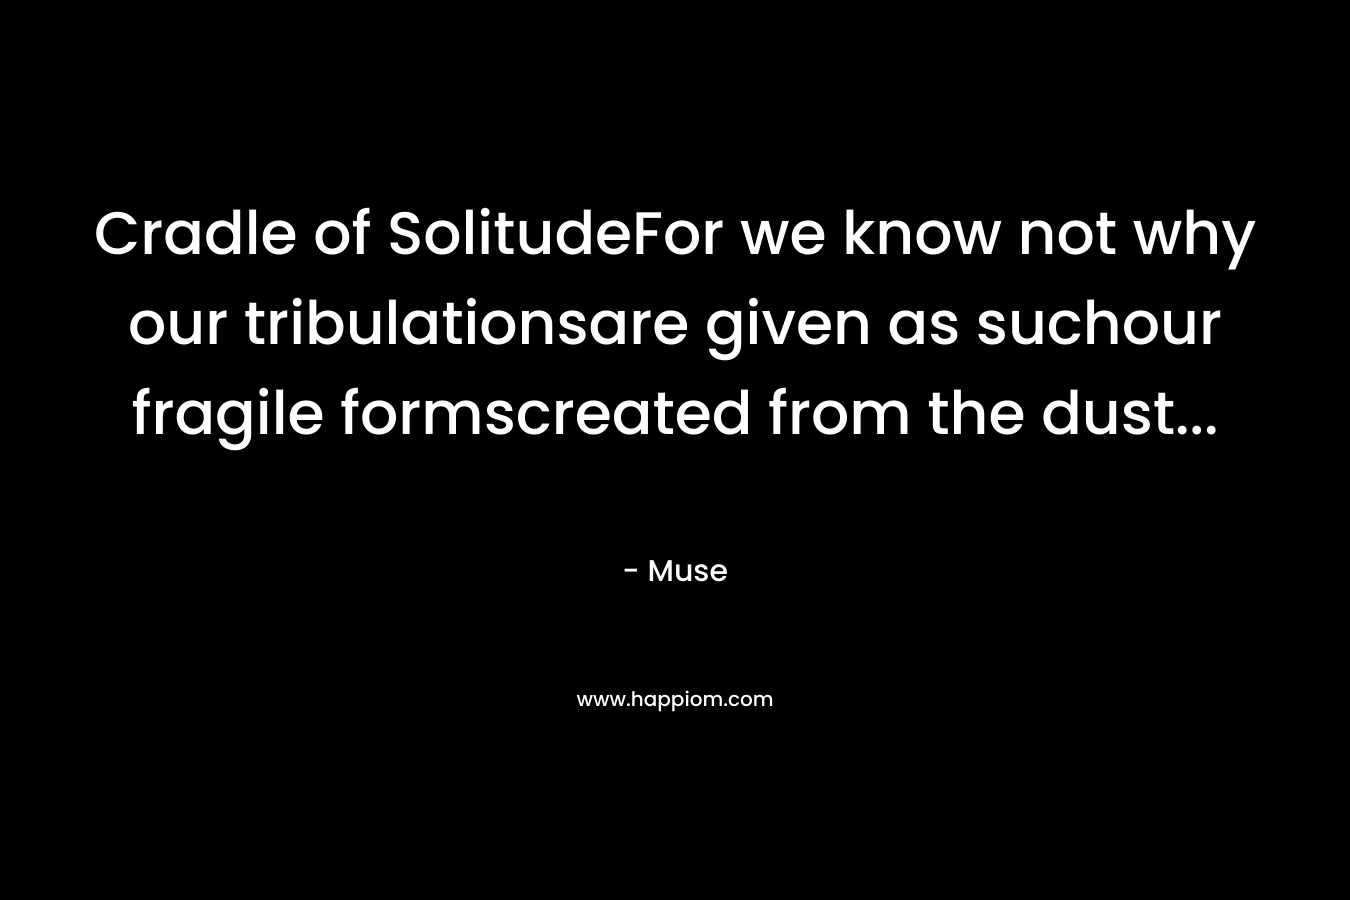 Cradle of SolitudeFor we know not why our tribulationsare given as suchour fragile formscreated from the dust… – Muse